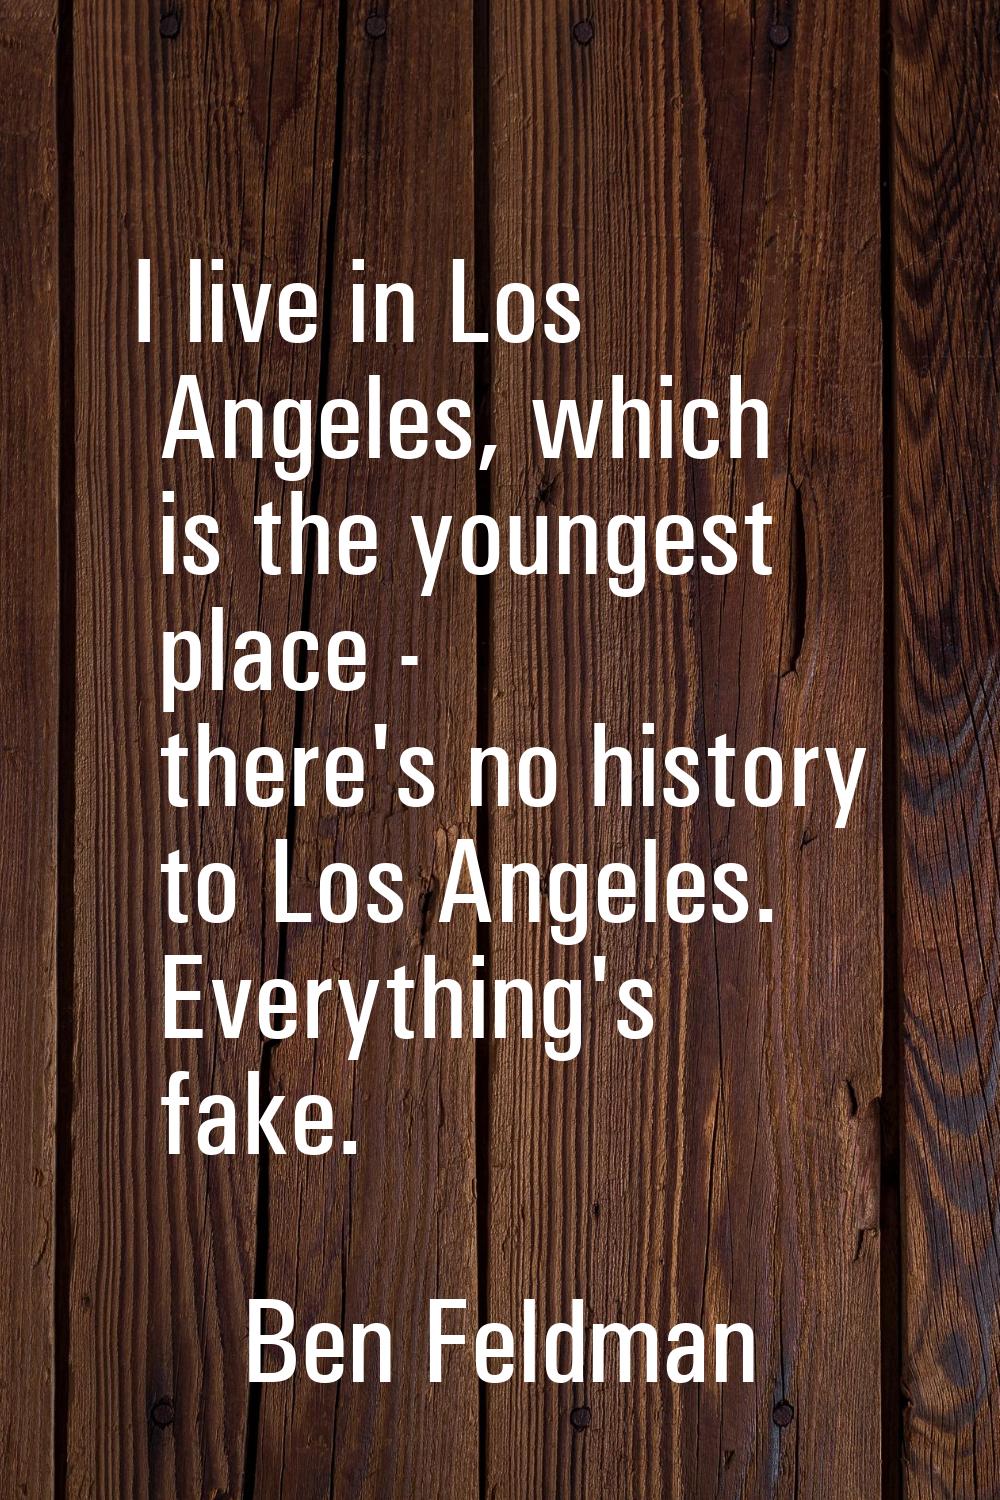 I live in Los Angeles, which is the youngest place - there's no history to Los Angeles. Everything'